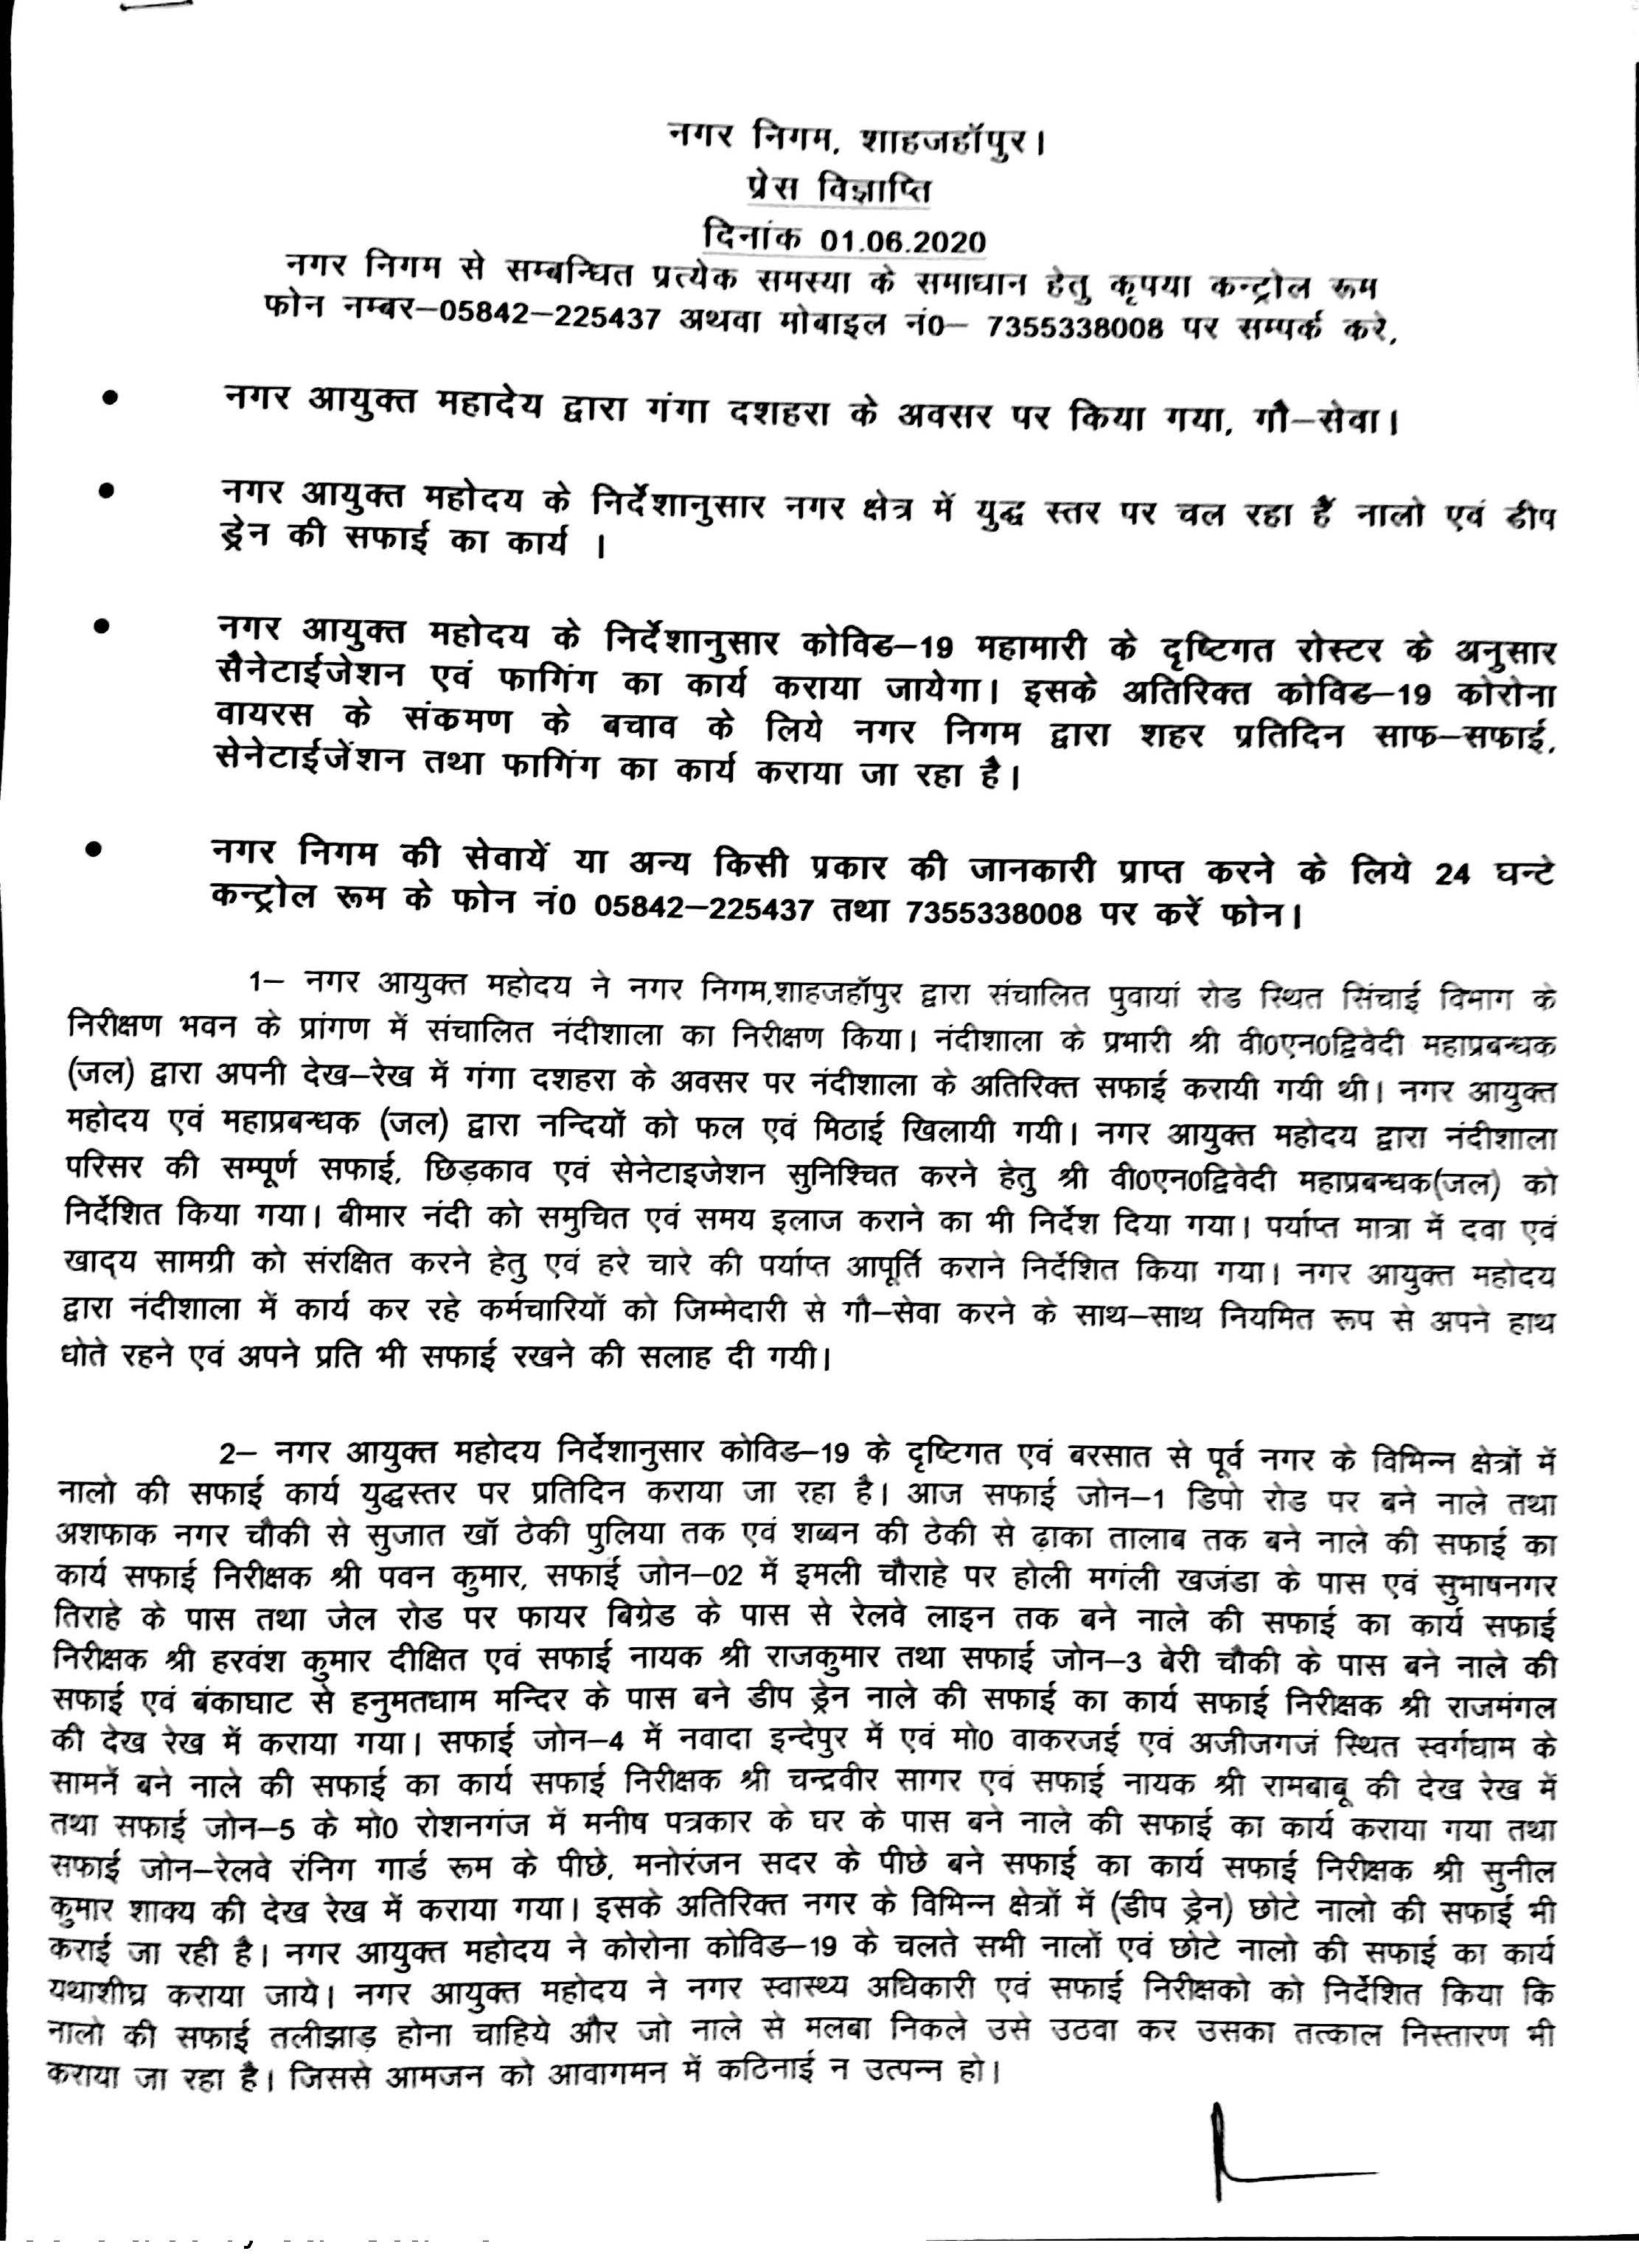 Regarding inspection of Nandi Shala on 01/06/2020 by Municipal Commissioner of Shahjahanpur